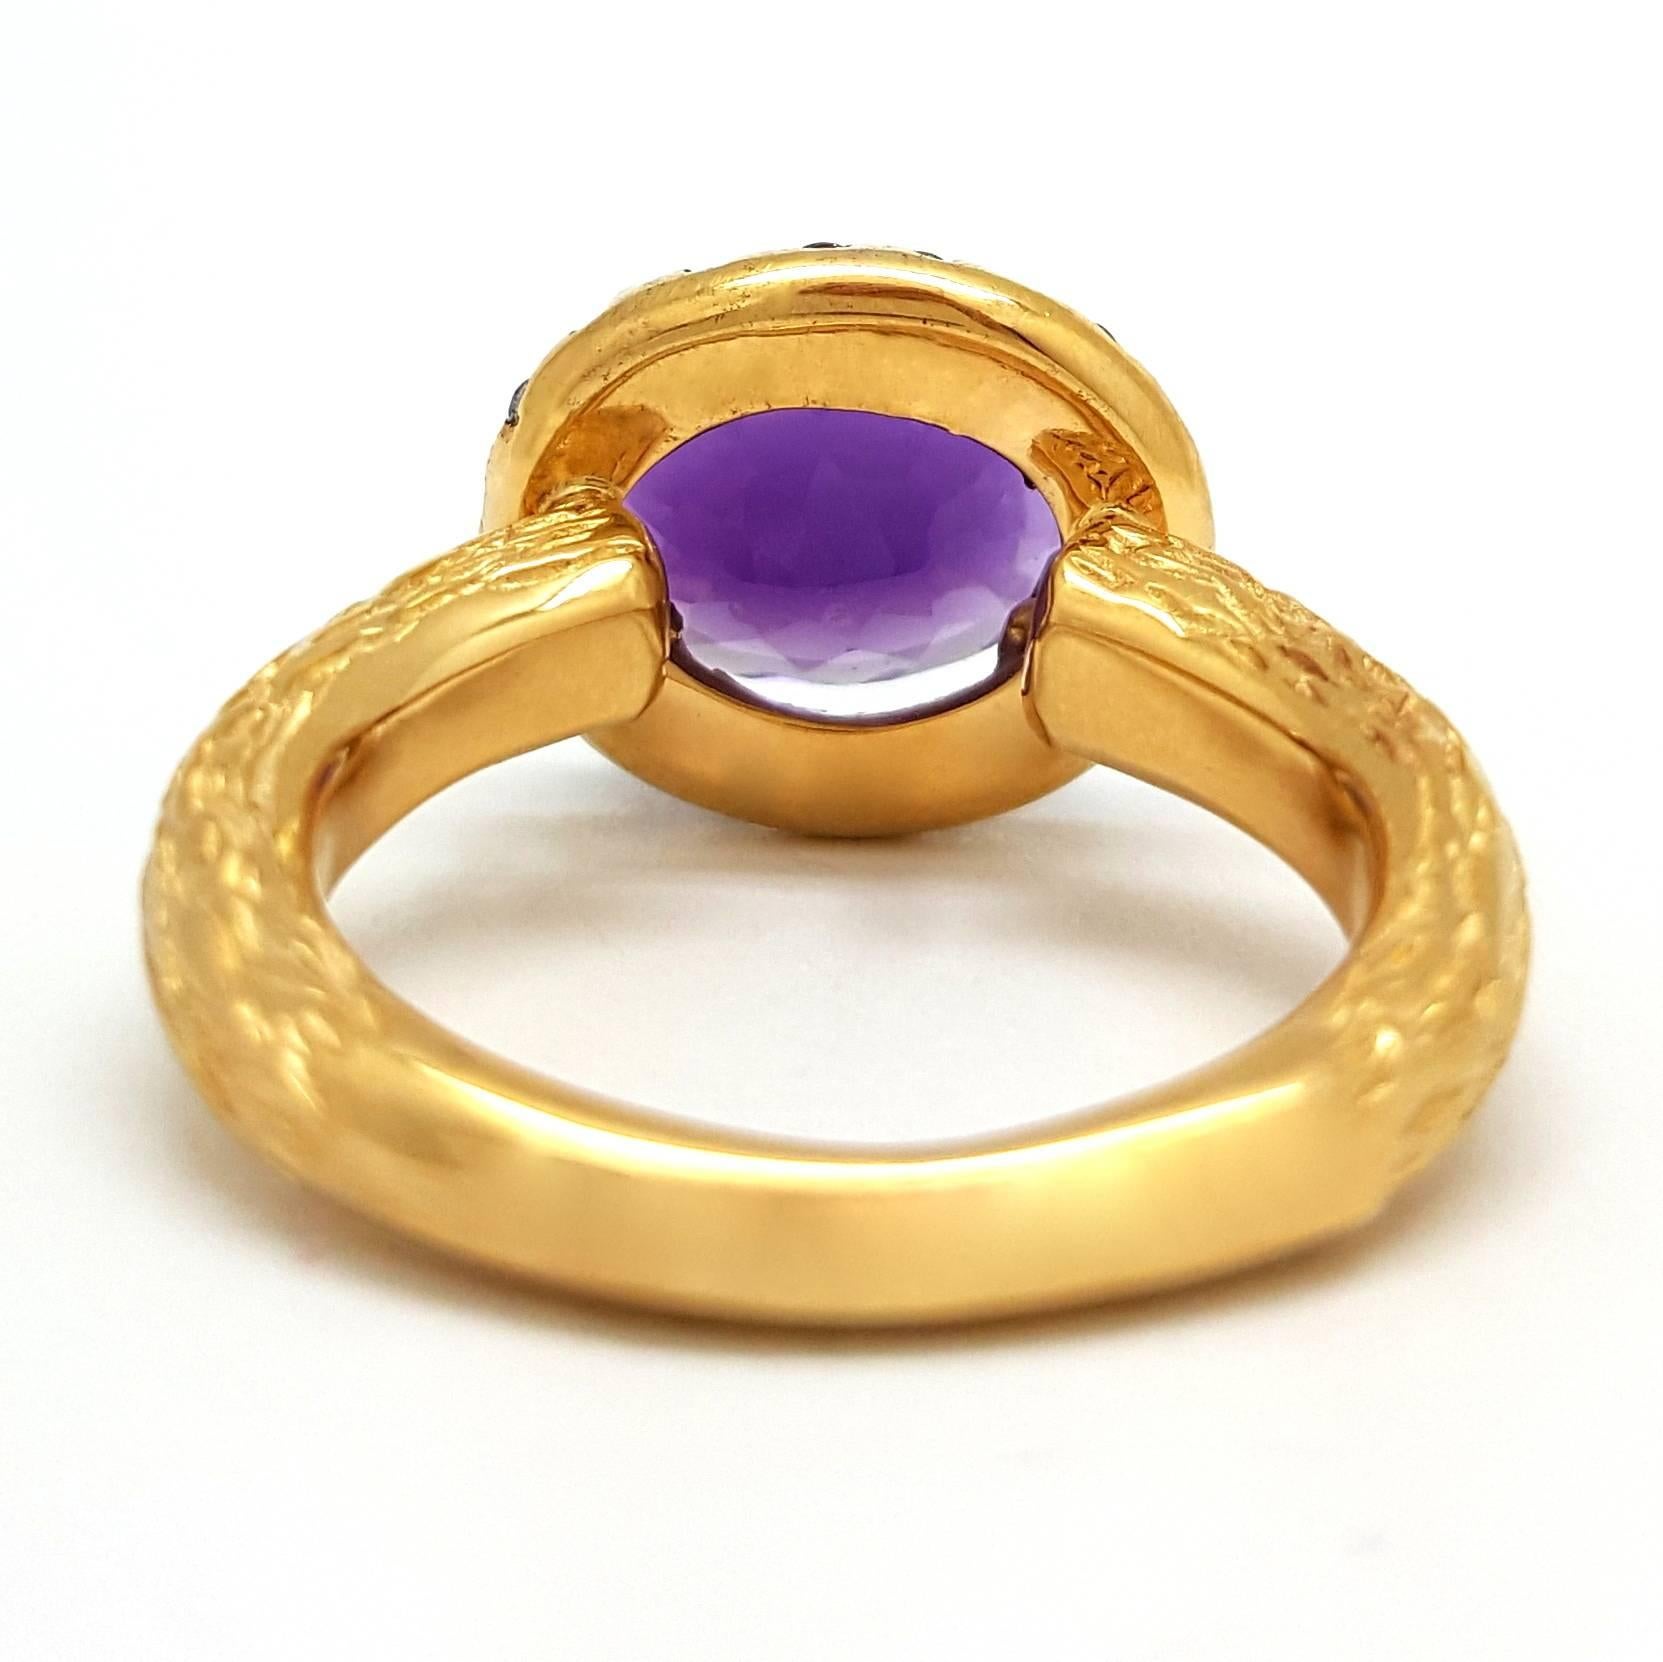 14k Yellow Gold, 2.98ct Oval-Cut Siberian Amethyst & Diamond Halo Ring In New Condition For Sale In Scottsdale, AZ